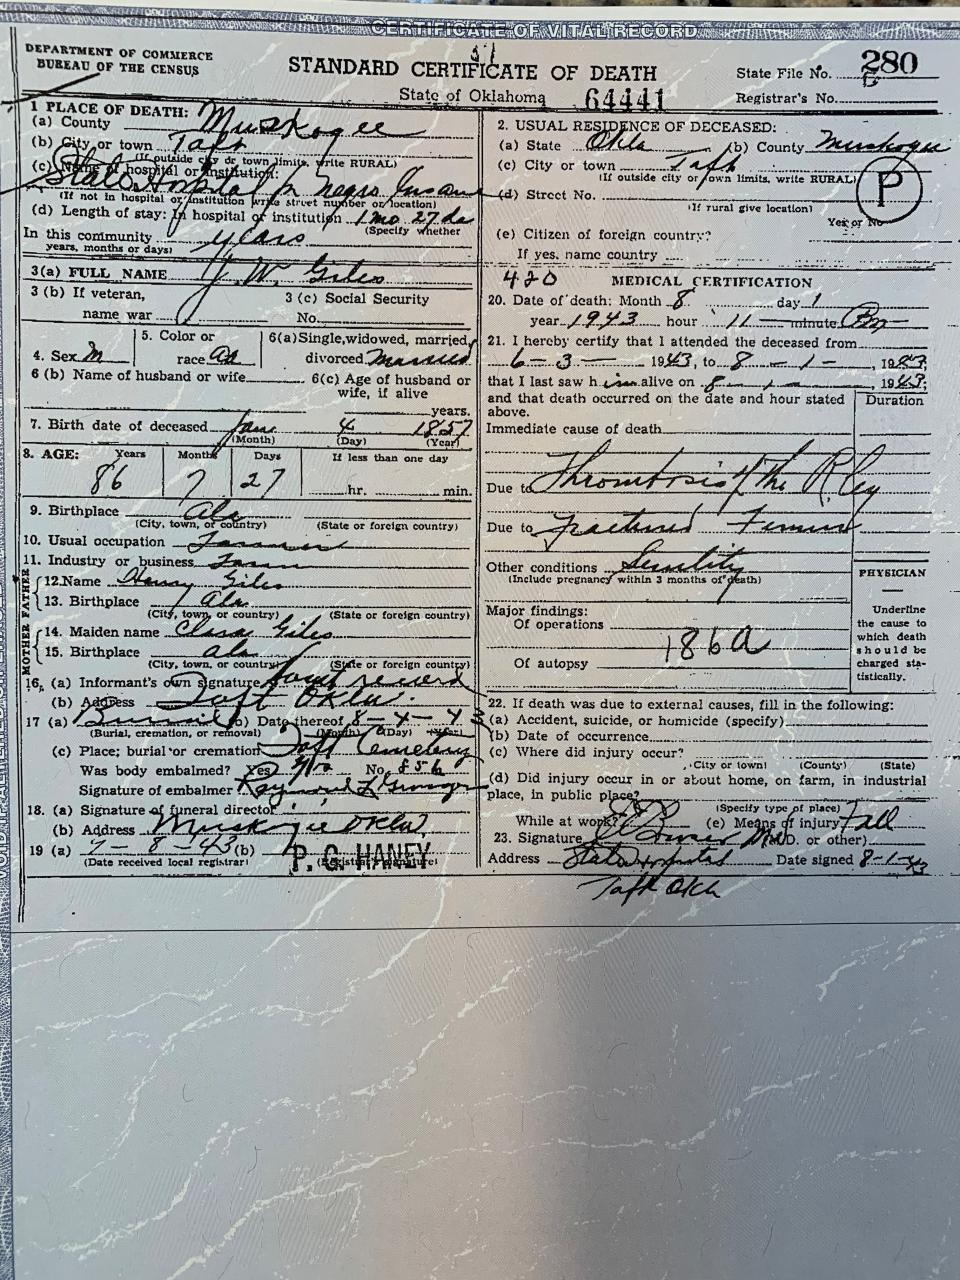 Jackson Giles' death certificate, which states that he died of "thrombosis of the right leg" due to a fractured femur on Aug. 1, 1943. The death certificate also said Giles was born in 1857, though Giles himself told a magazine in 1903 that he was born in 1859.